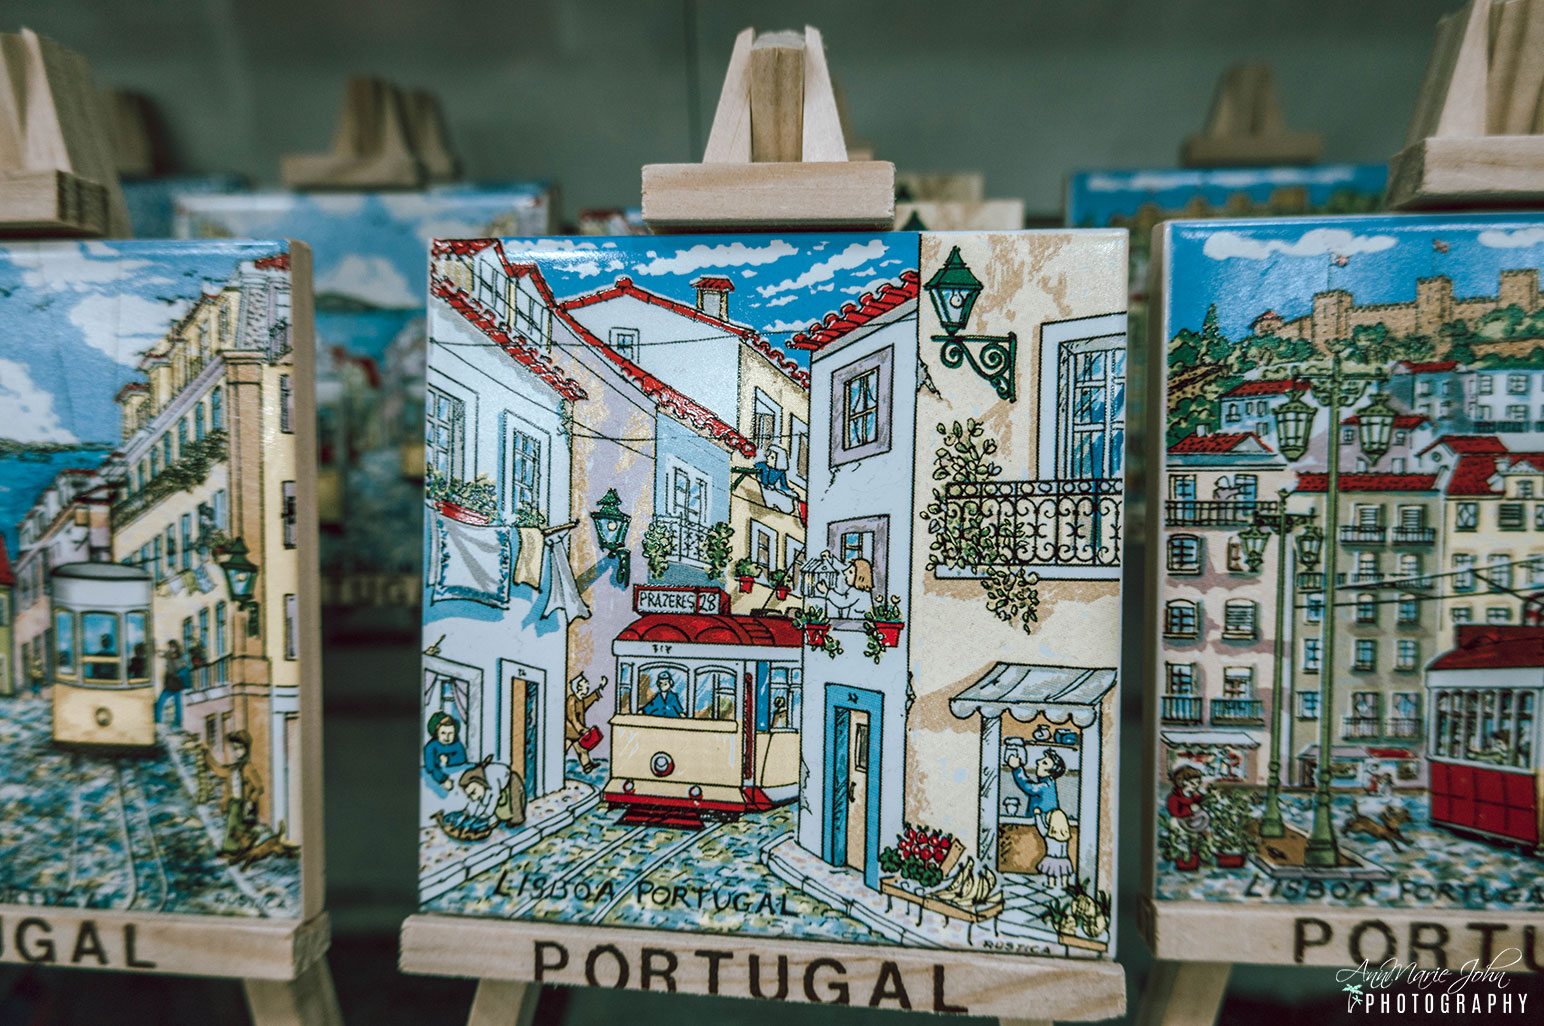 7 Uniquely Portuguese Items You Should Buy in Portugal